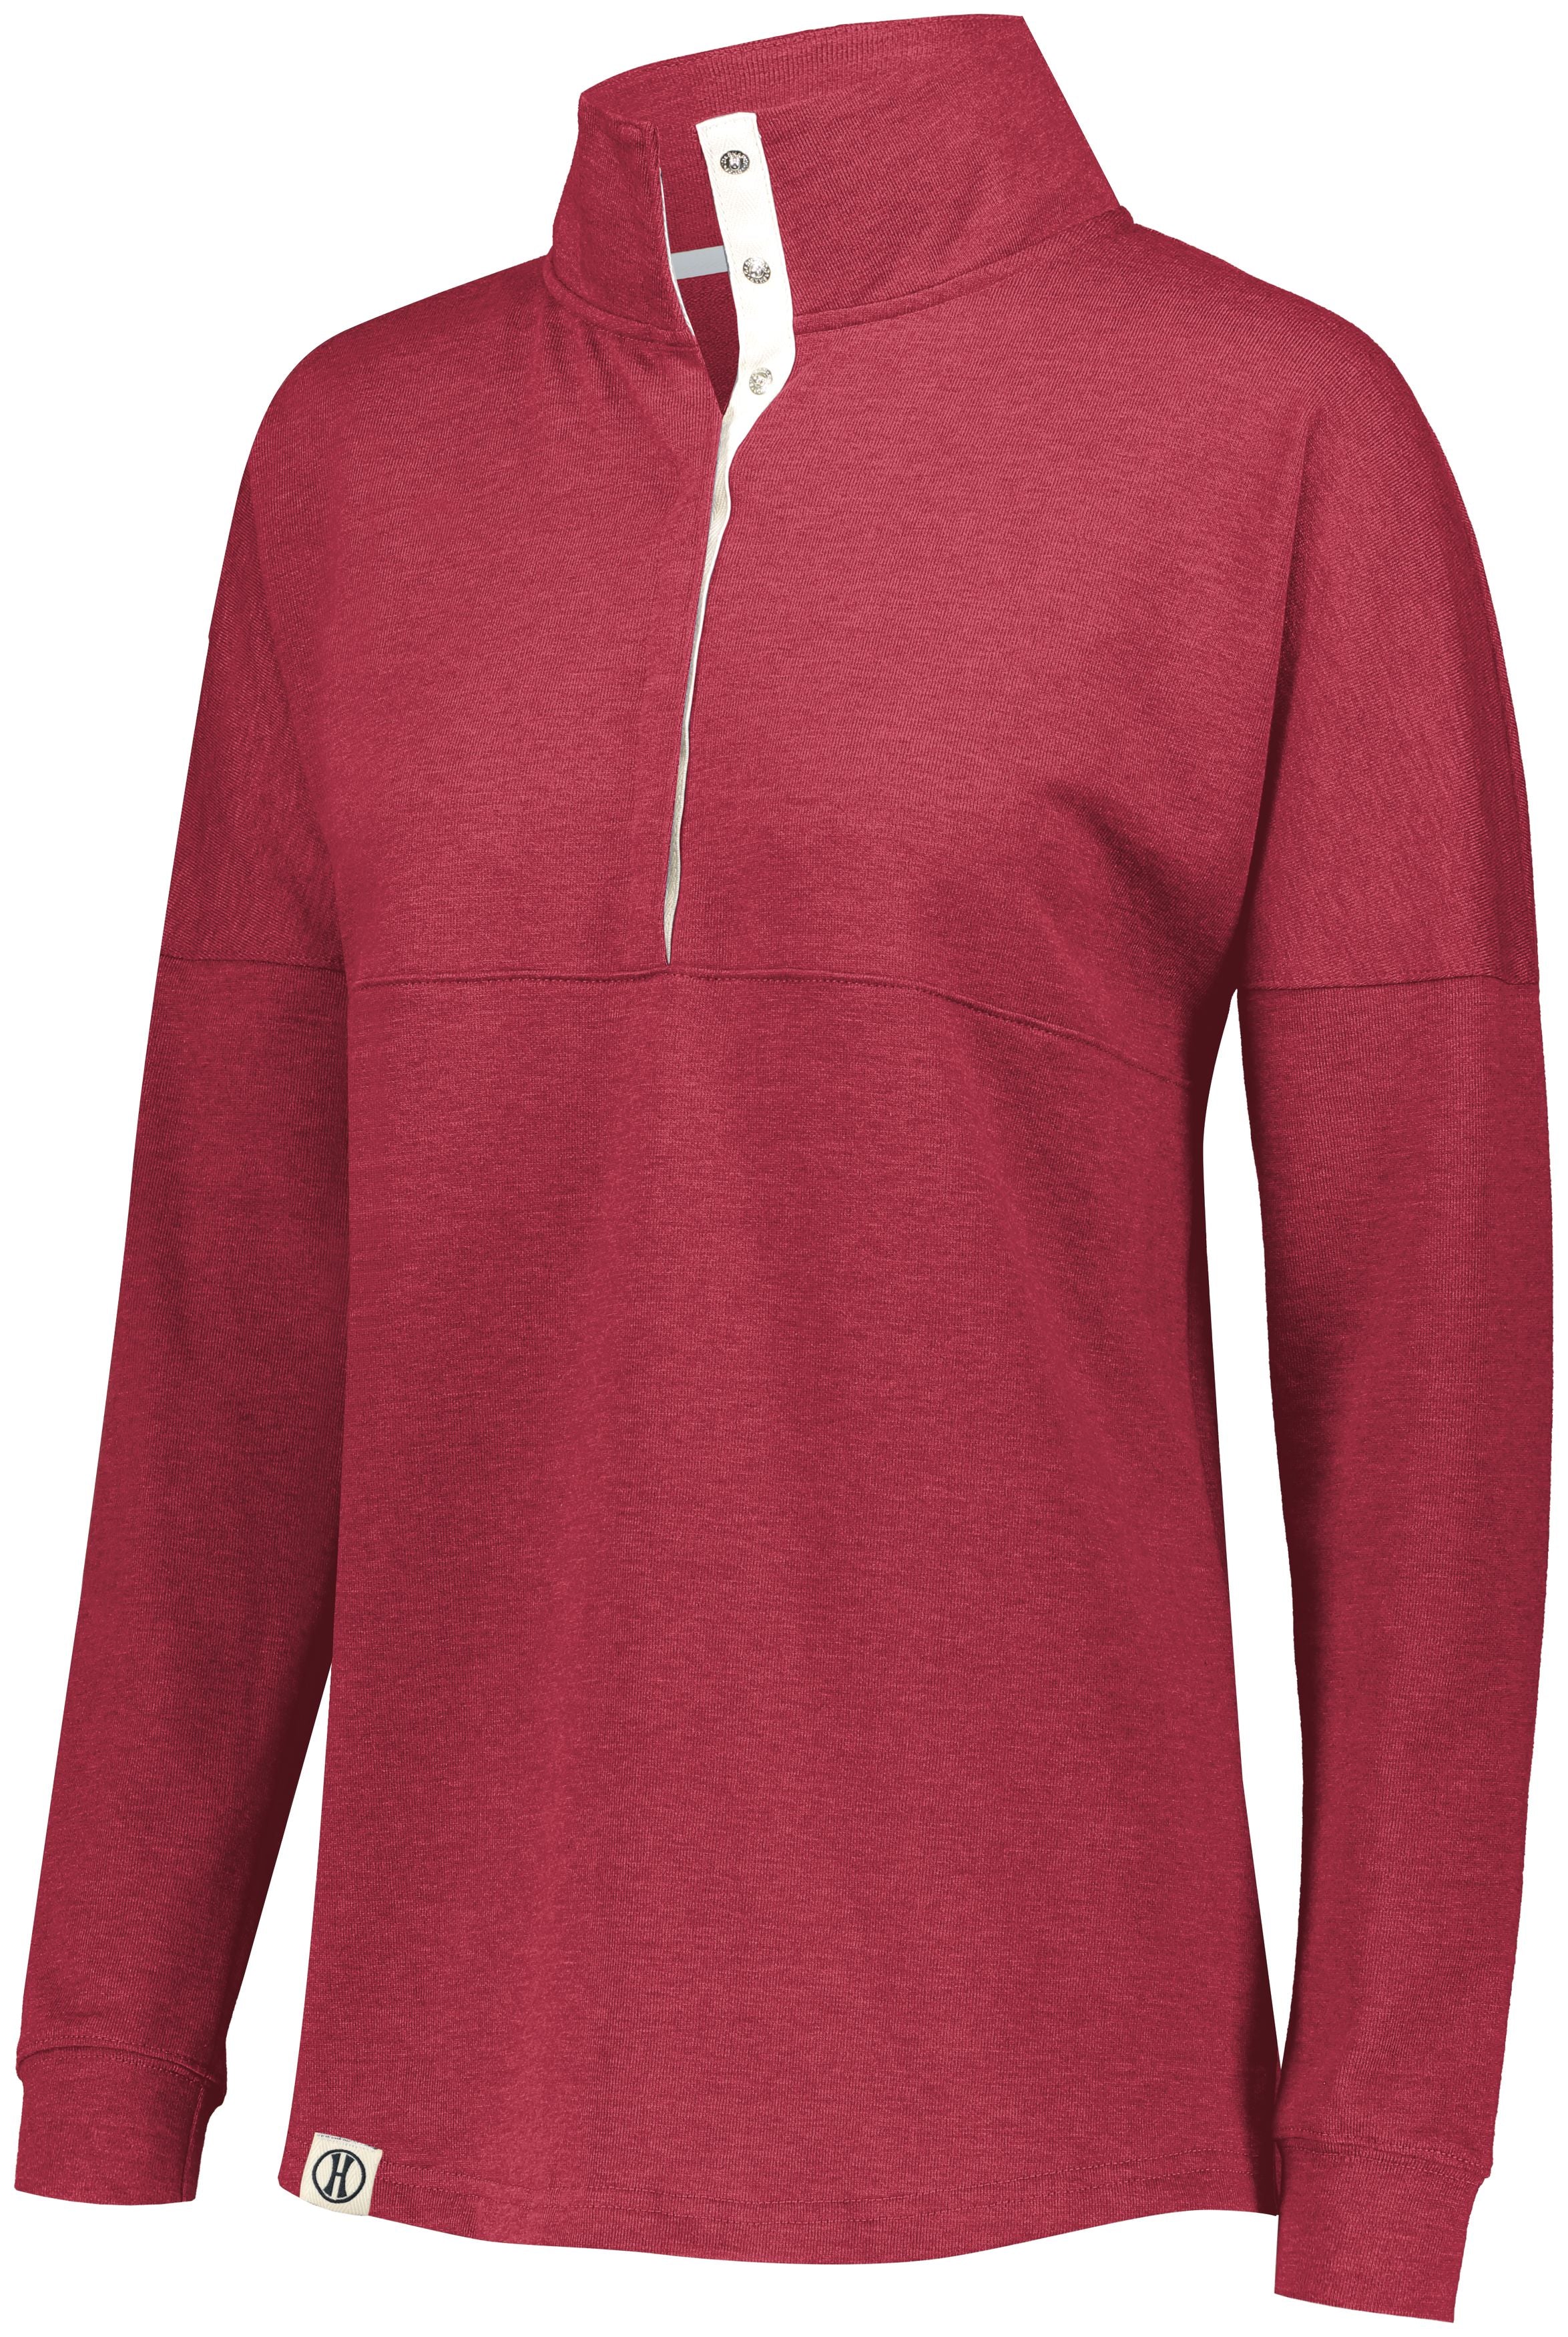 Holloway Ladies Sophomore Pullover in Scarlet Heather  -Part of the Ladies, Holloway, Shirts product lines at KanaleyCreations.com